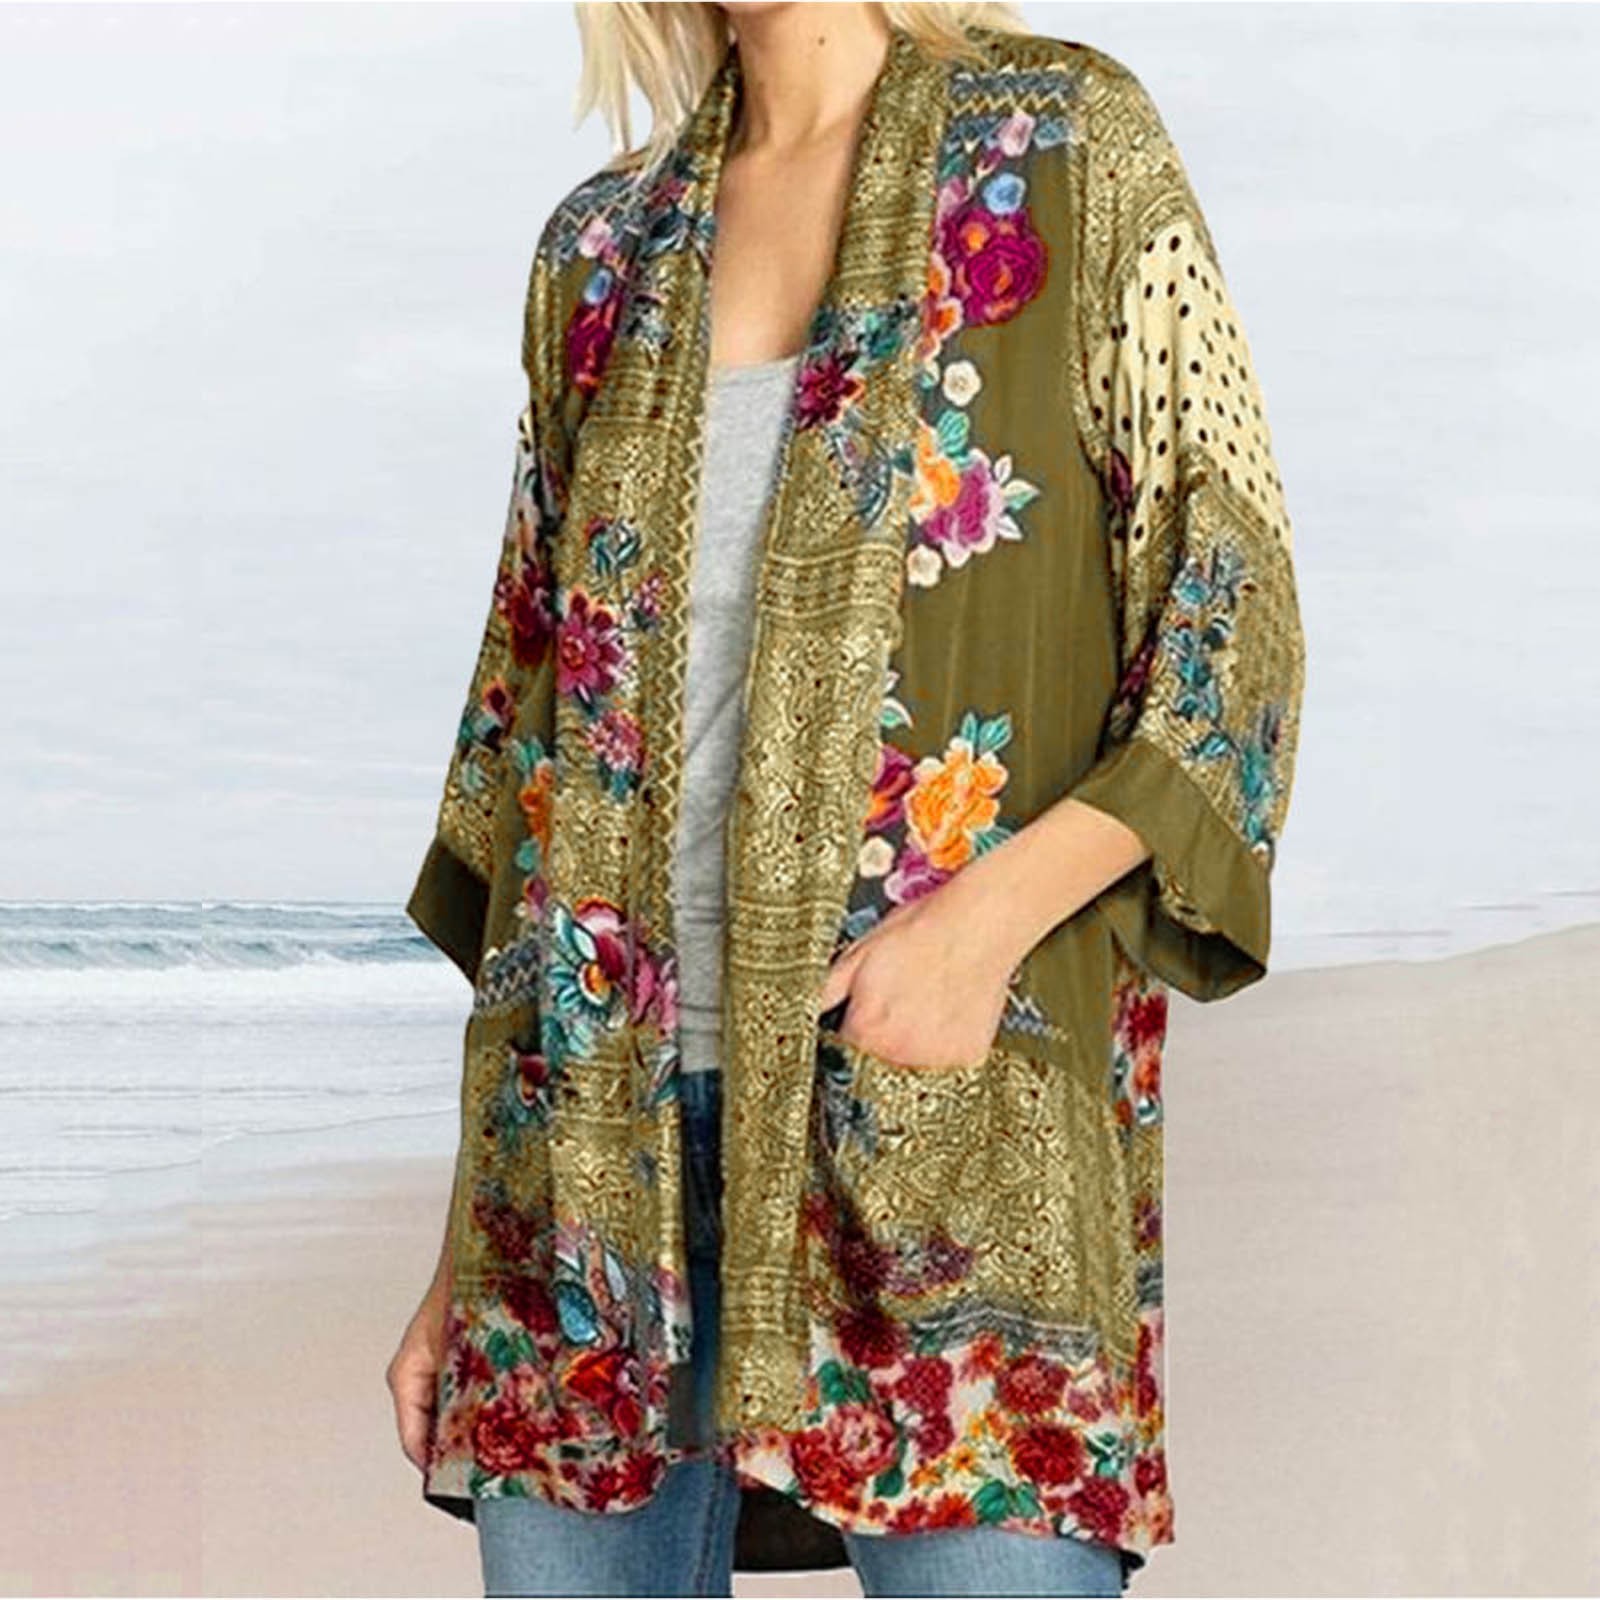 Women's Long Sleeve Floral Print Fashion Sexy Loose Cardigan